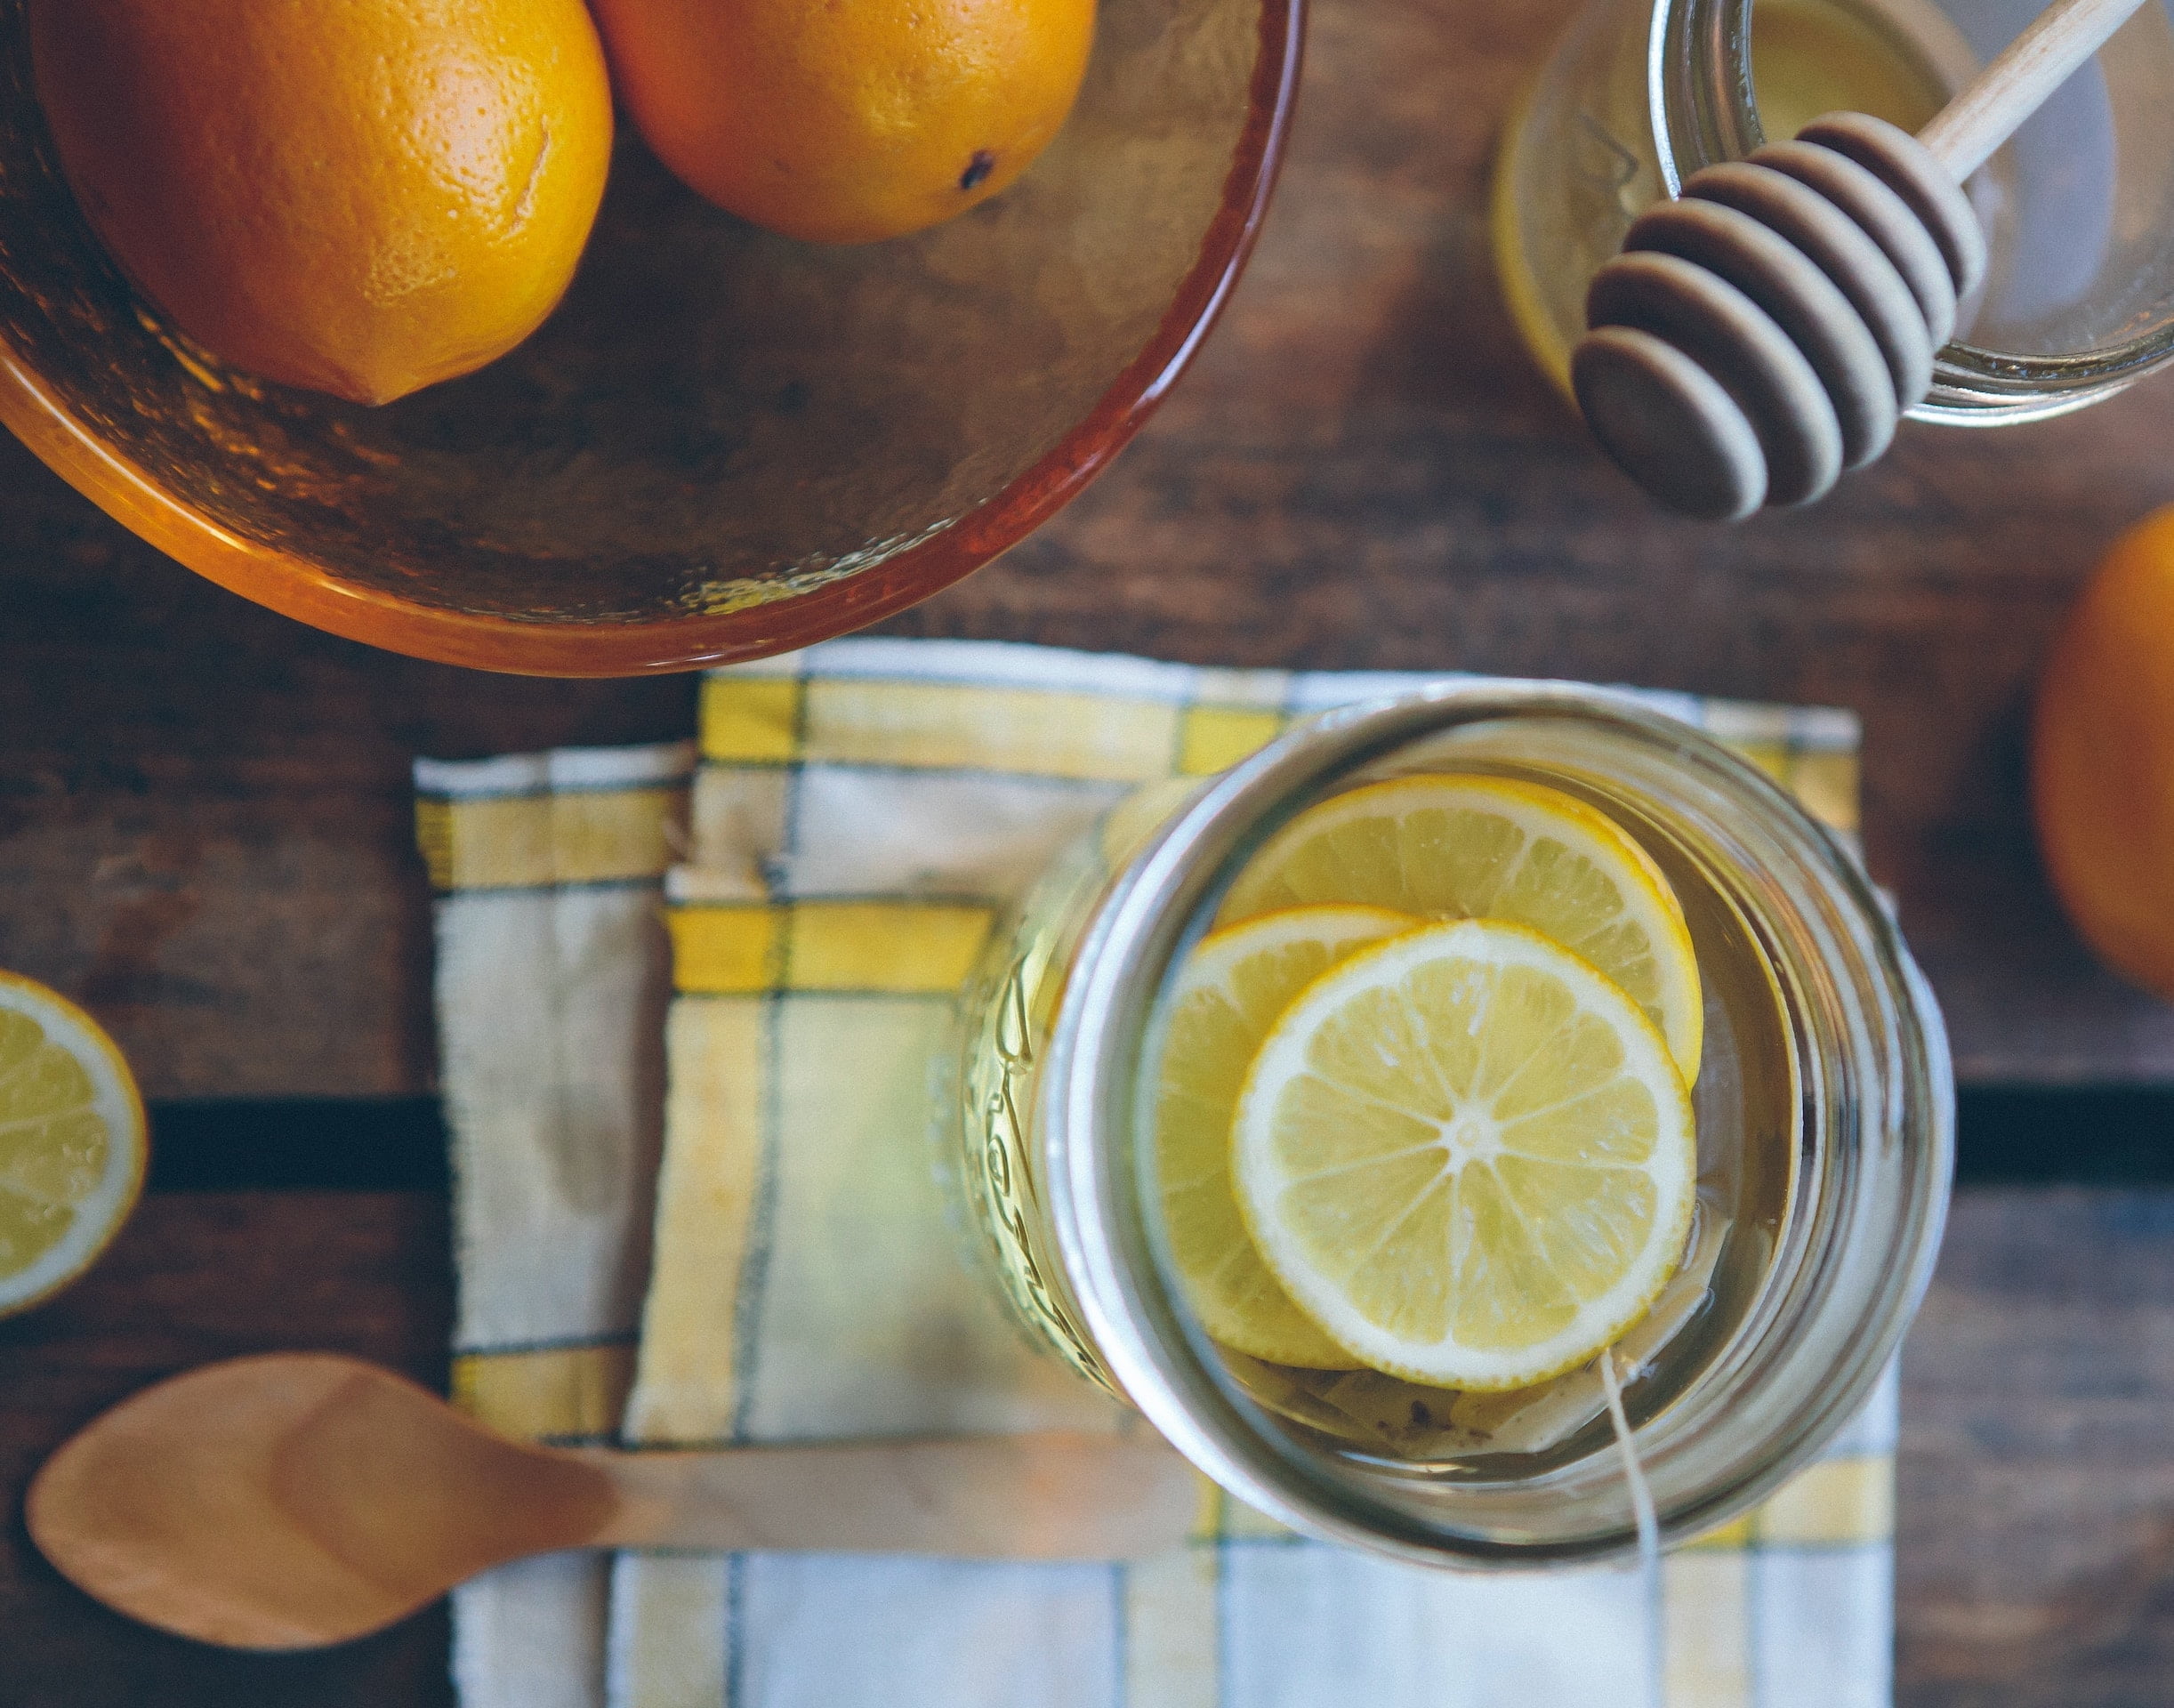 Nutrition Professionals recommend lemon water to support detoxification pathways